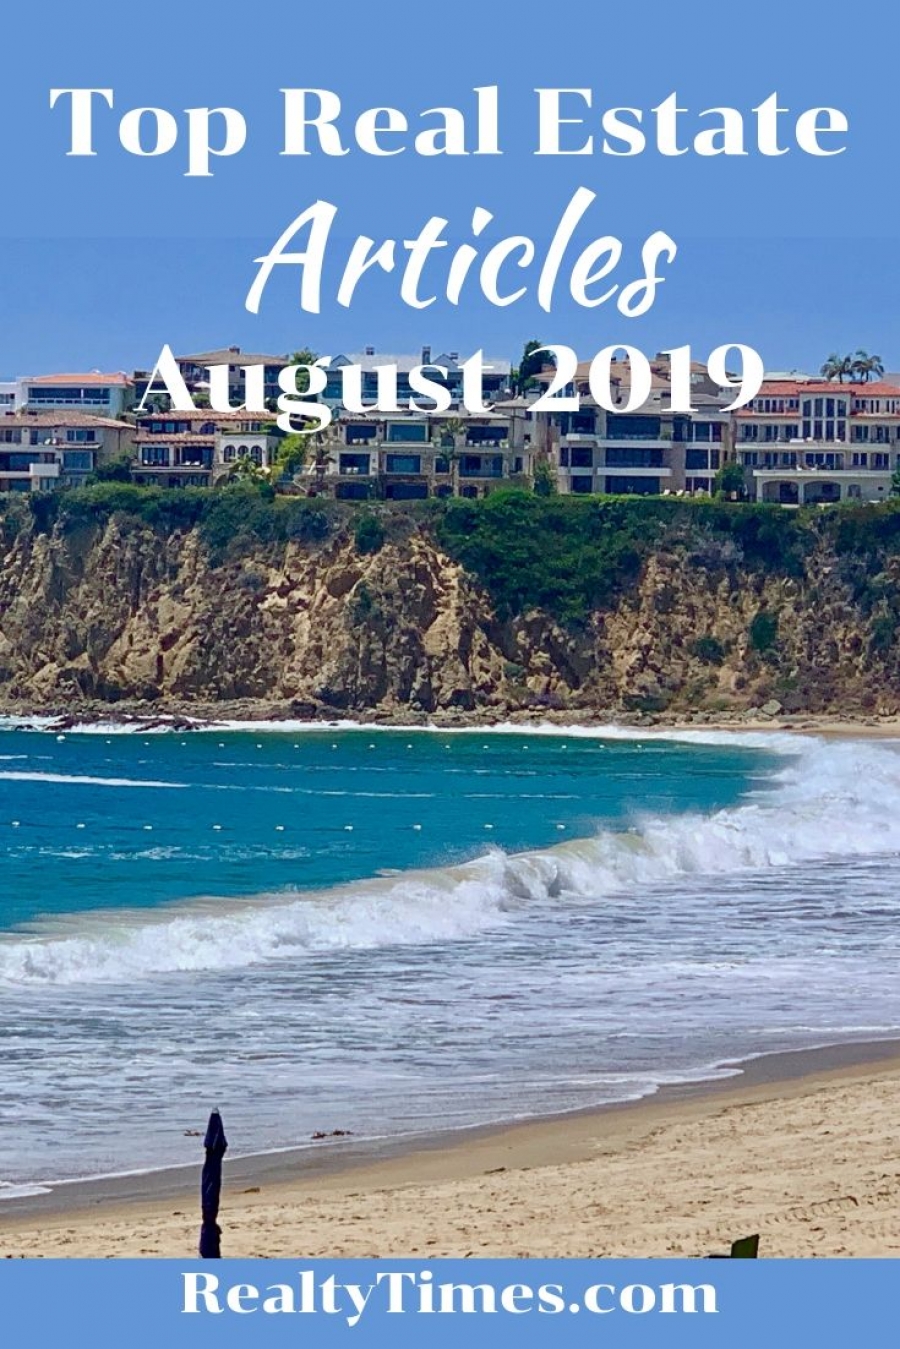 Top 10 Real Estate Articles for August 2019